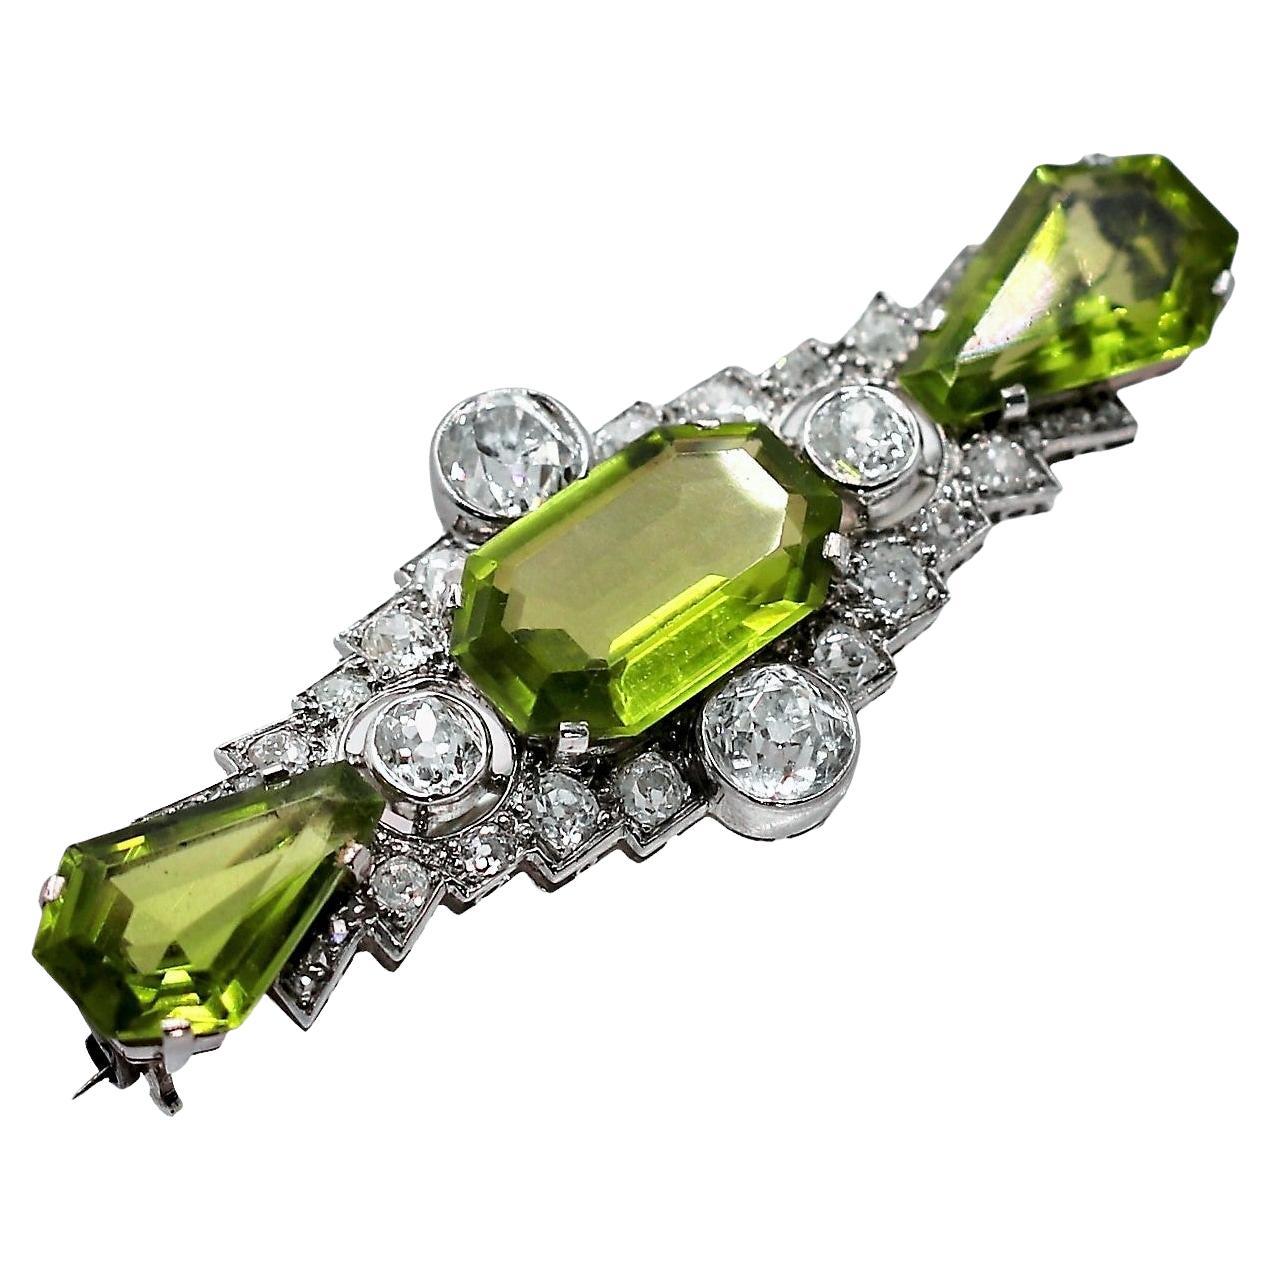 Antique Art Deco Platinum Brooch with Diamonds and Peridot